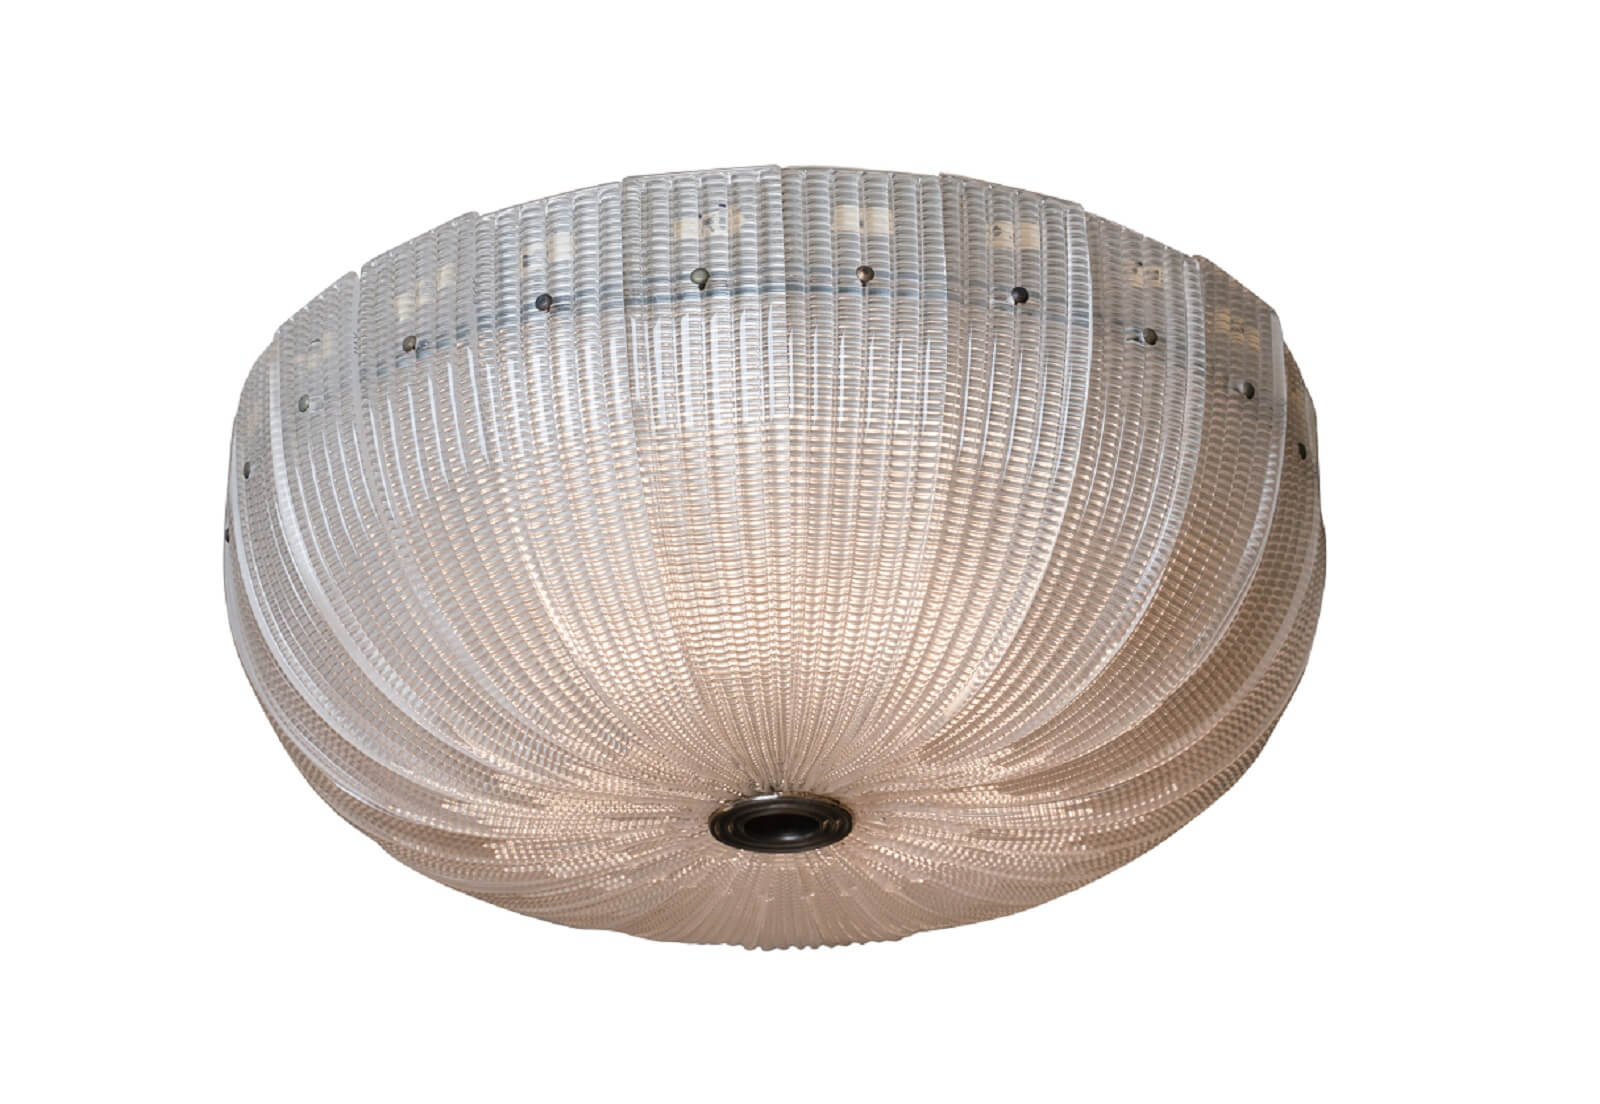 Ceiling lamp mod. 5305 by Venini for sale